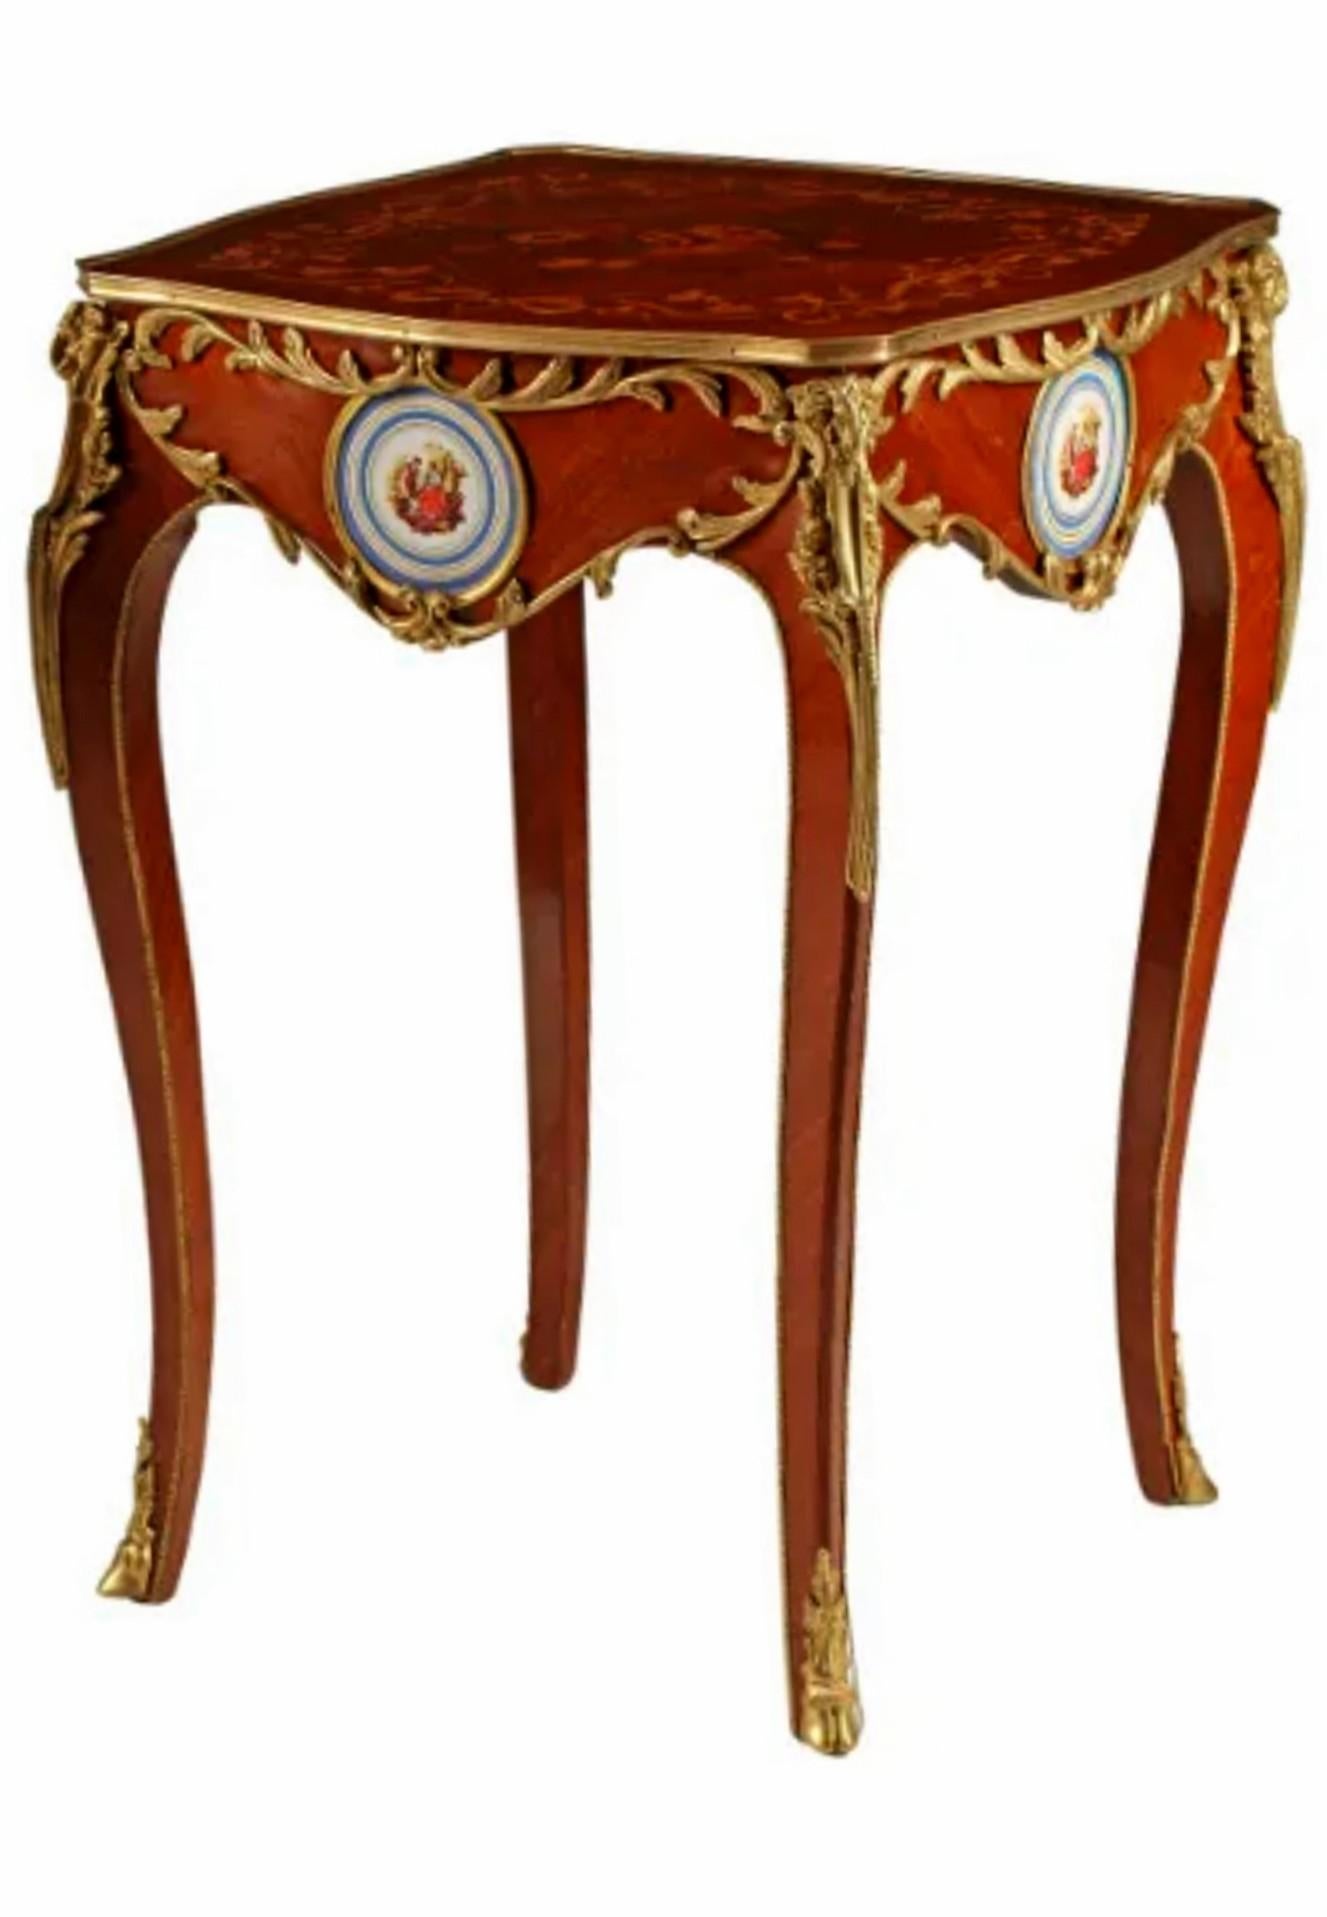 A fine quality pair of vintage French Louis XV style kingwood floral marquetry bronze doré and porcelain mounted tables. Francois Linke (1855-1946) taste, in the manner of famous Parisian ébéniste Martin Carlin (1730–1785), having a square top with